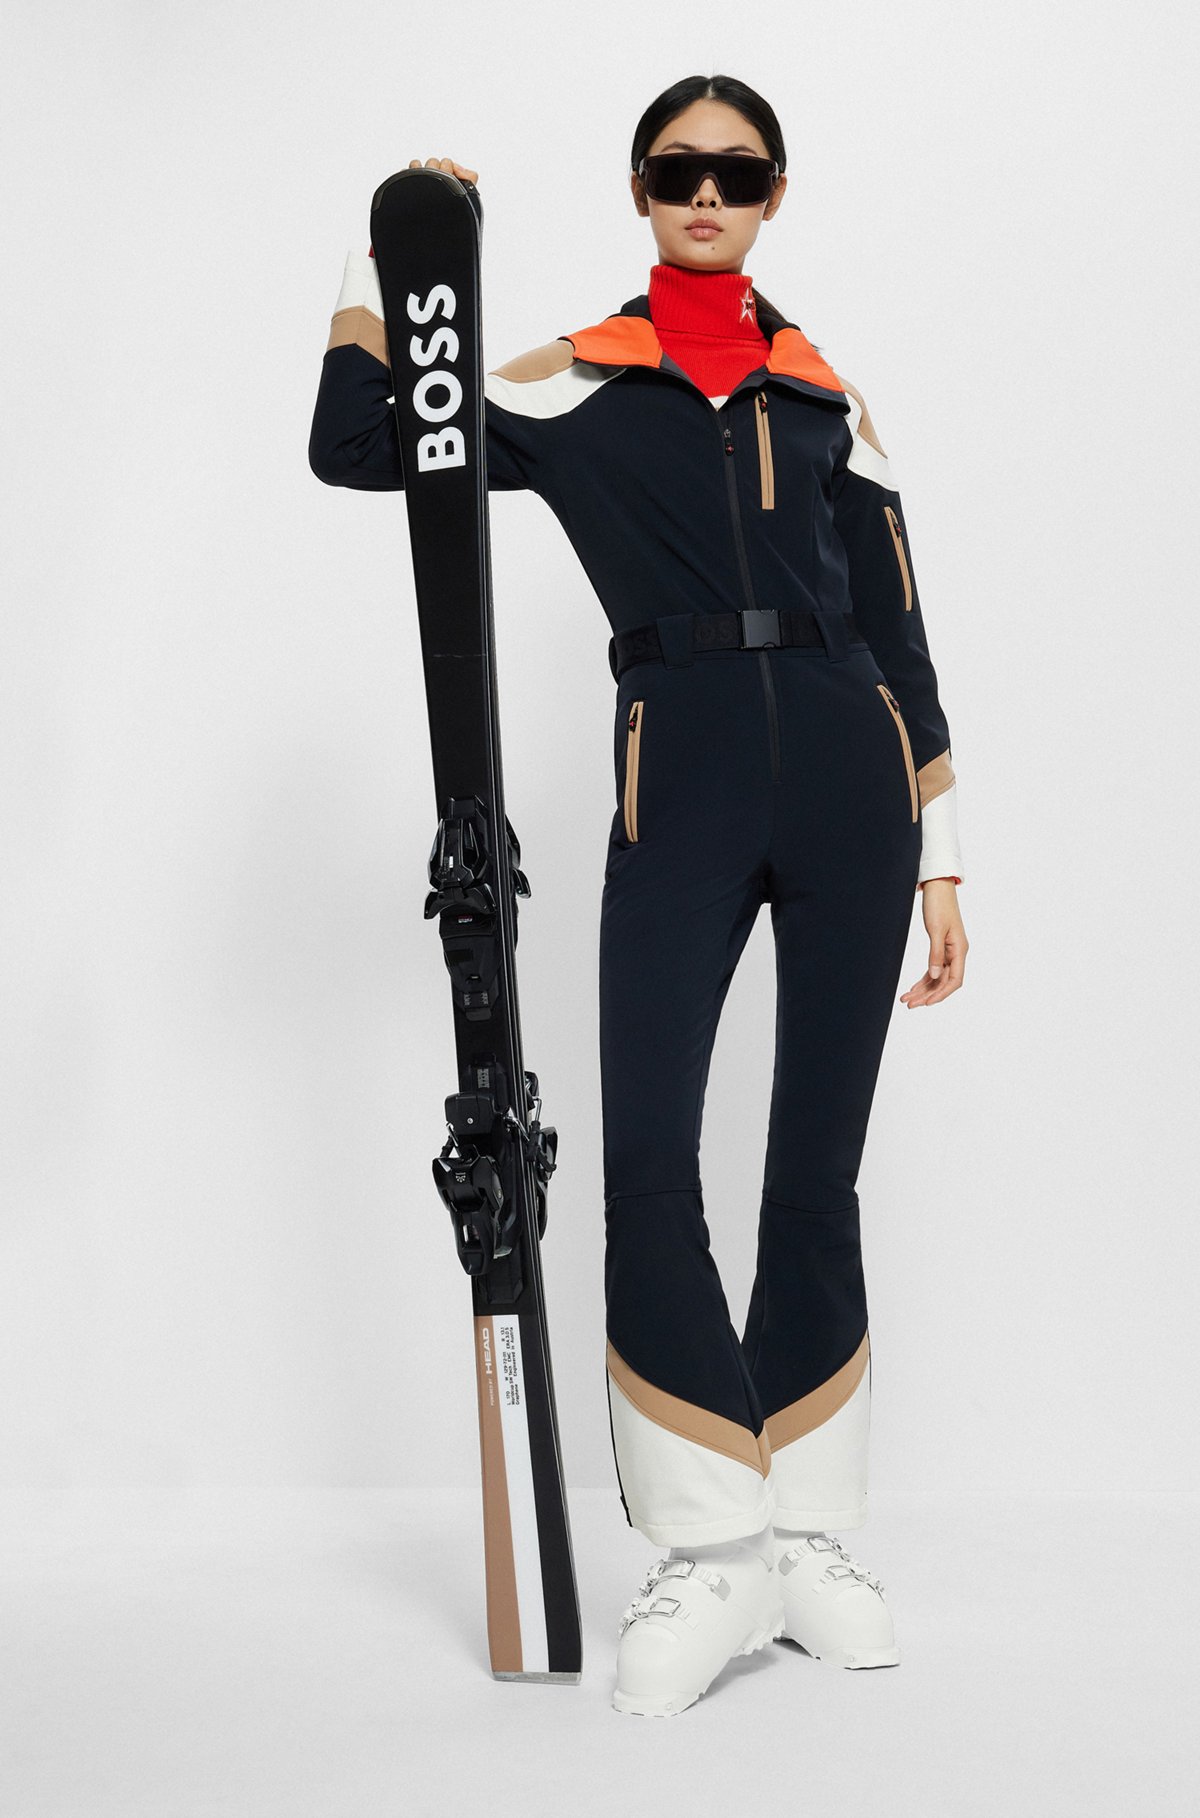 BOSS - BOSS x Perfect Moment hooded bootcut ski suit with branding